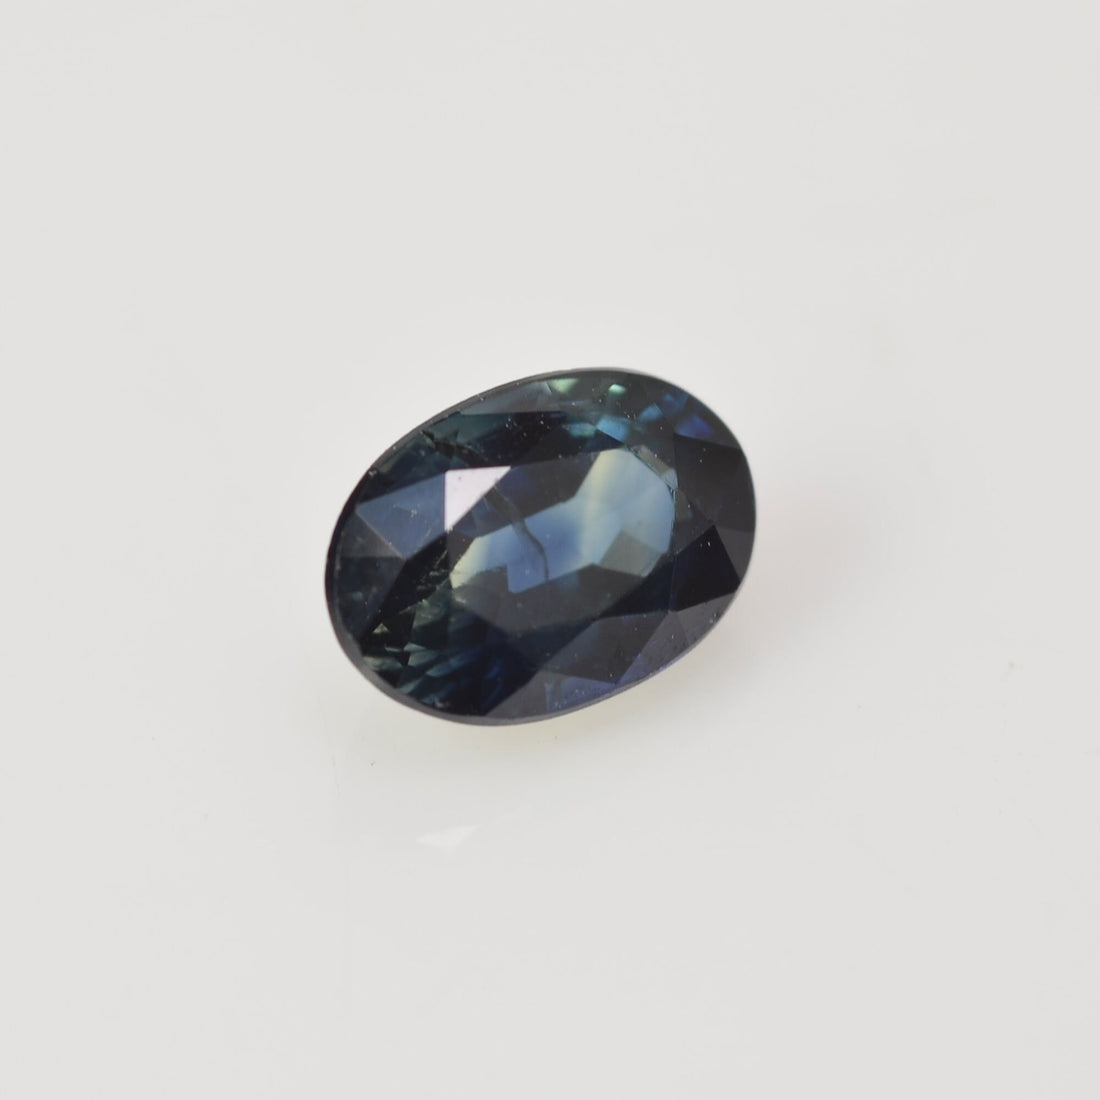 0.64 cts Natural Blue Green Teal Sapphire Loose Gemstone Oval Cut